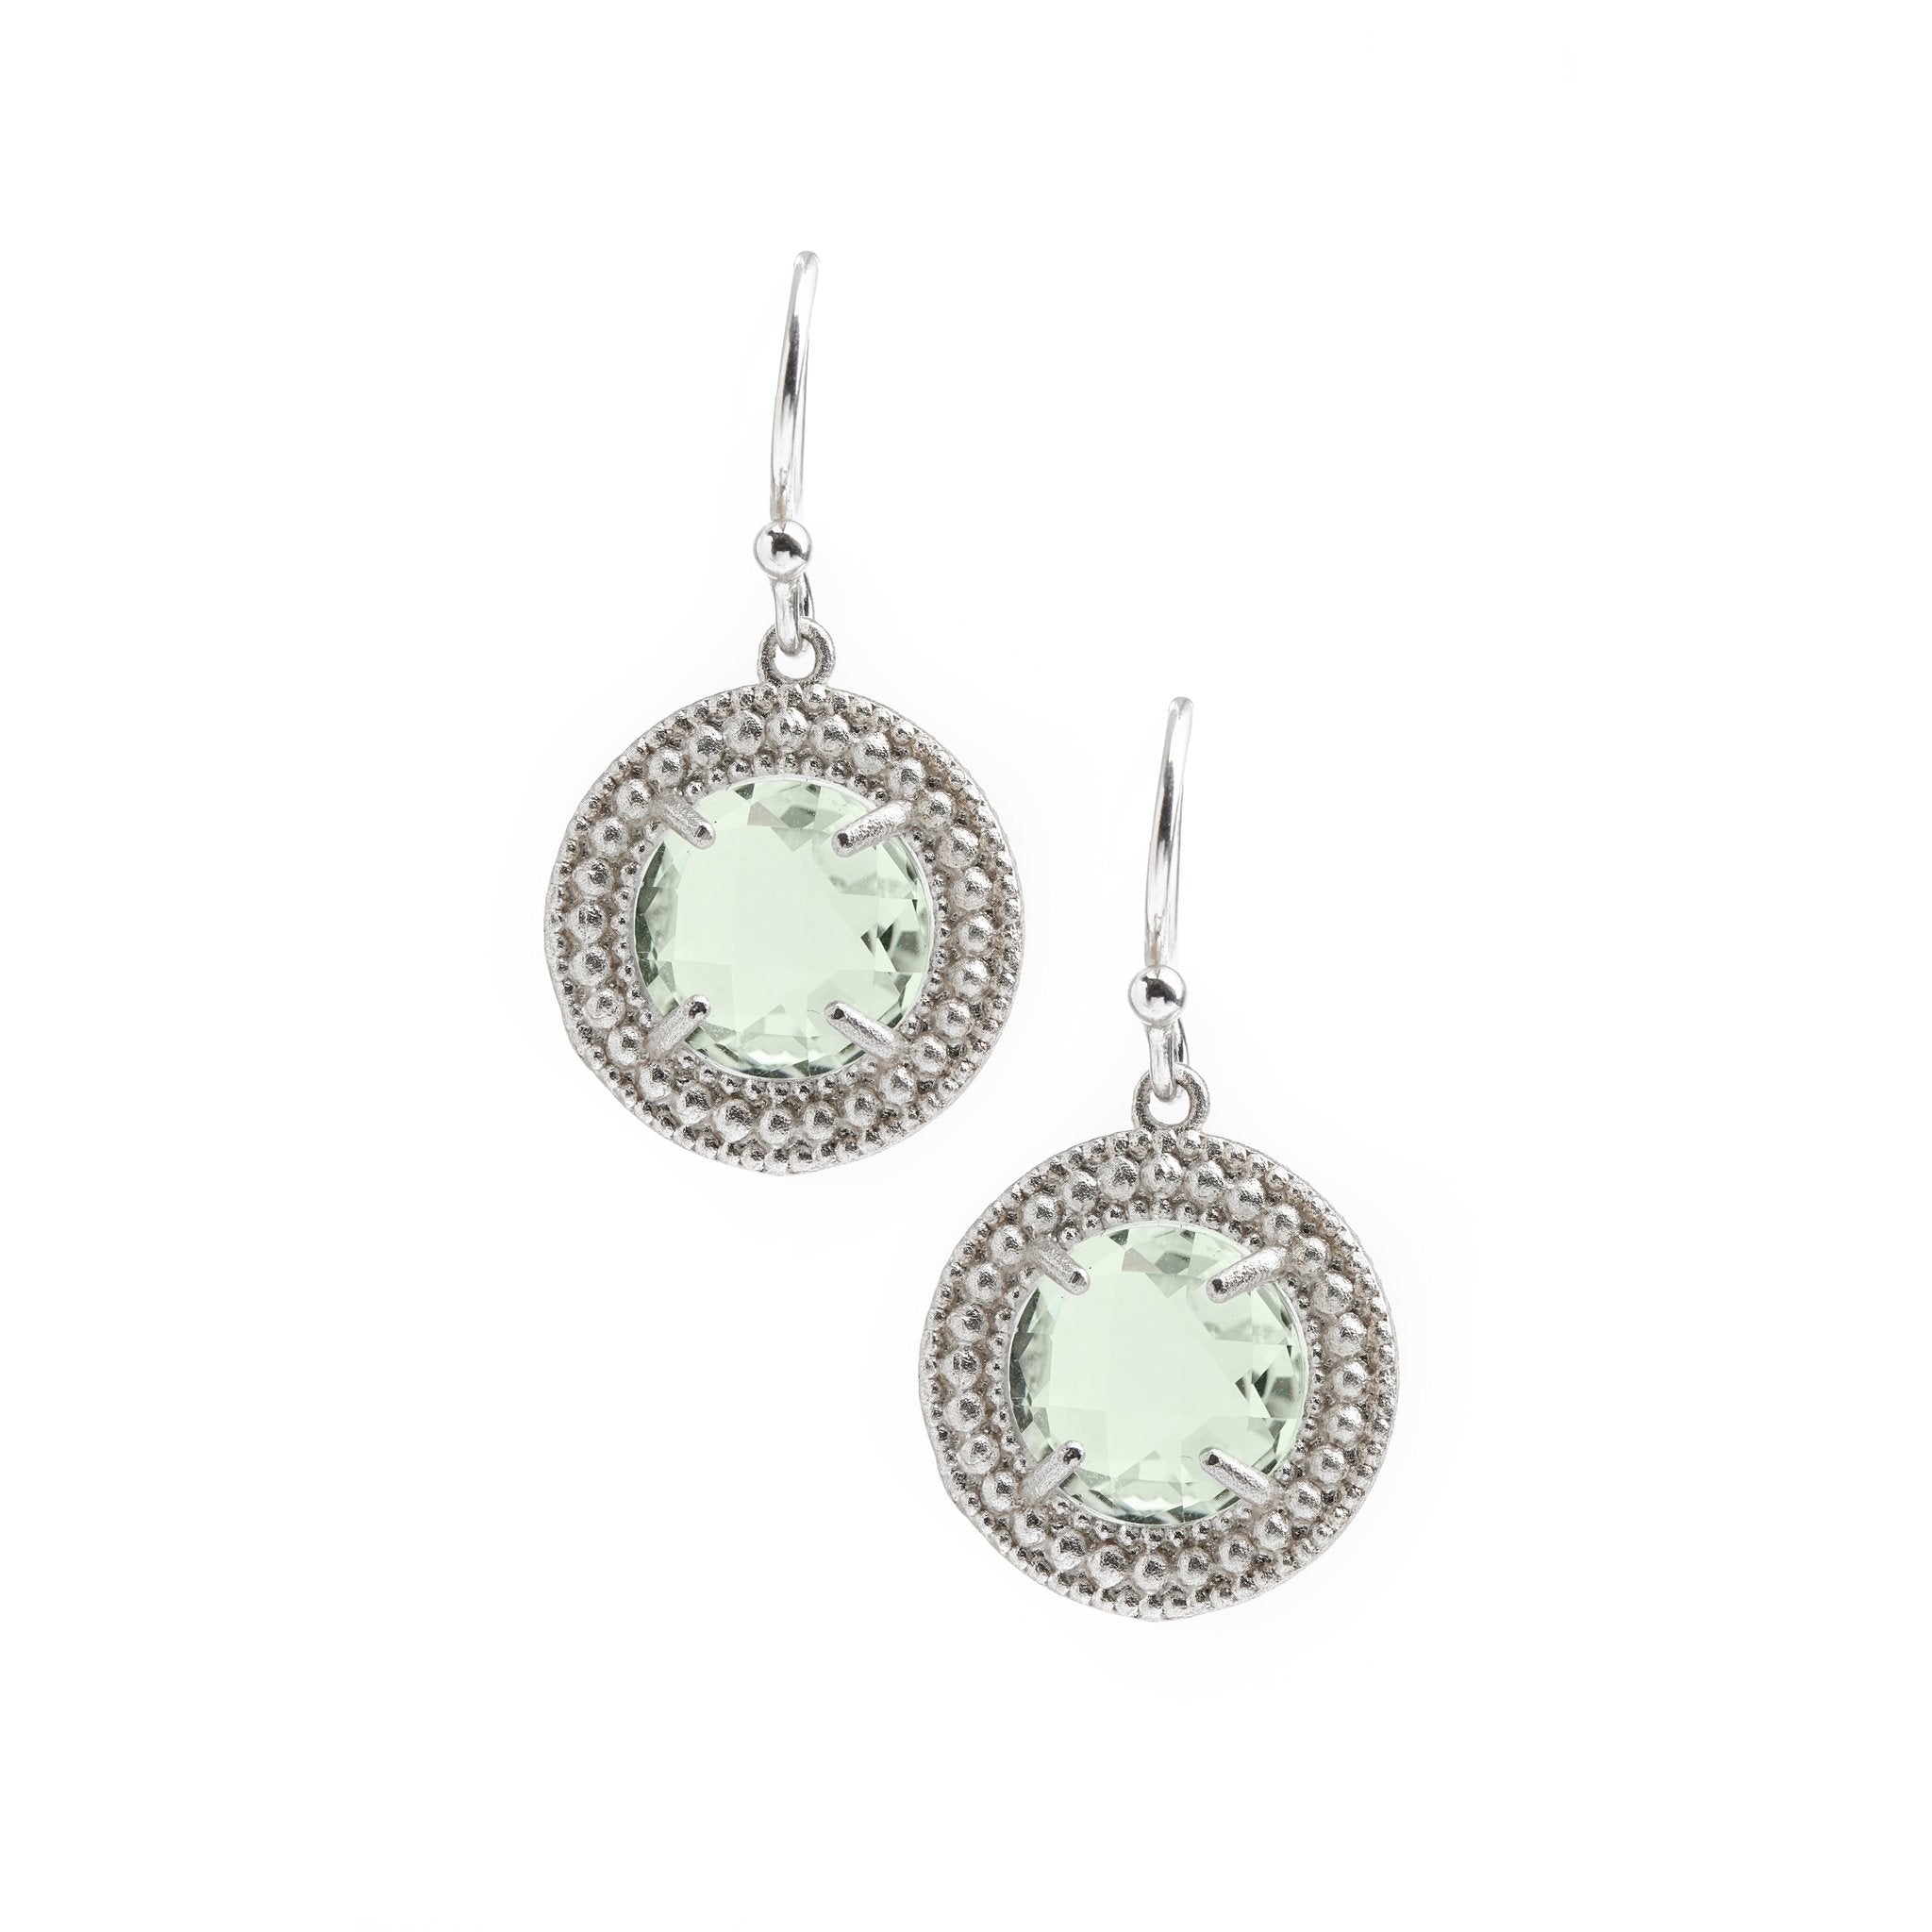 The Classic Earrings with green amethysts. - Christelle Chamberland